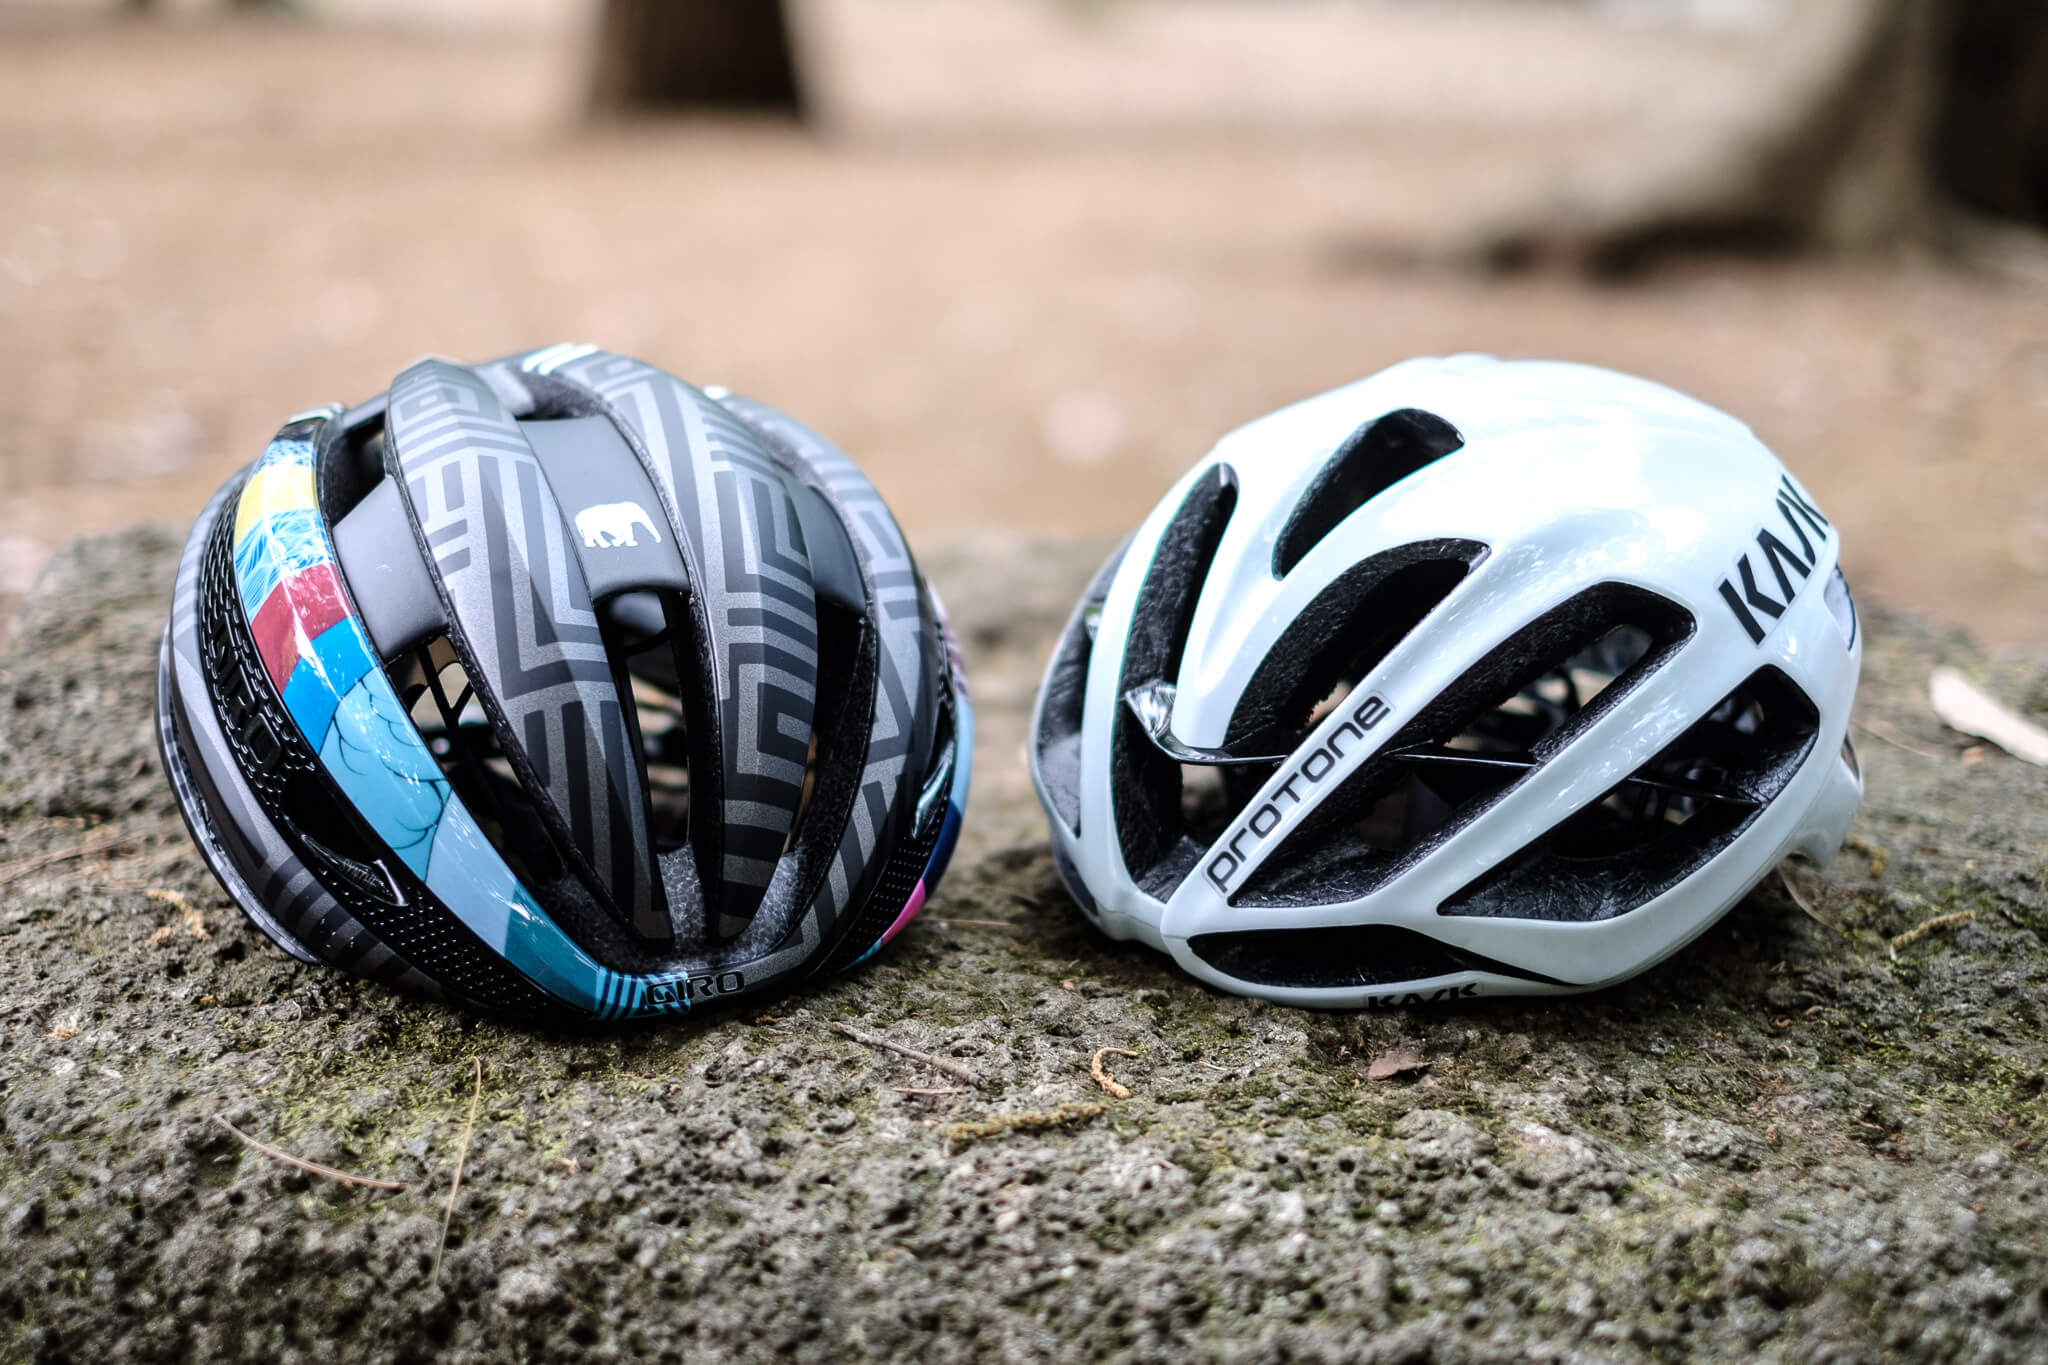 Giro Synthe or KASK Protone